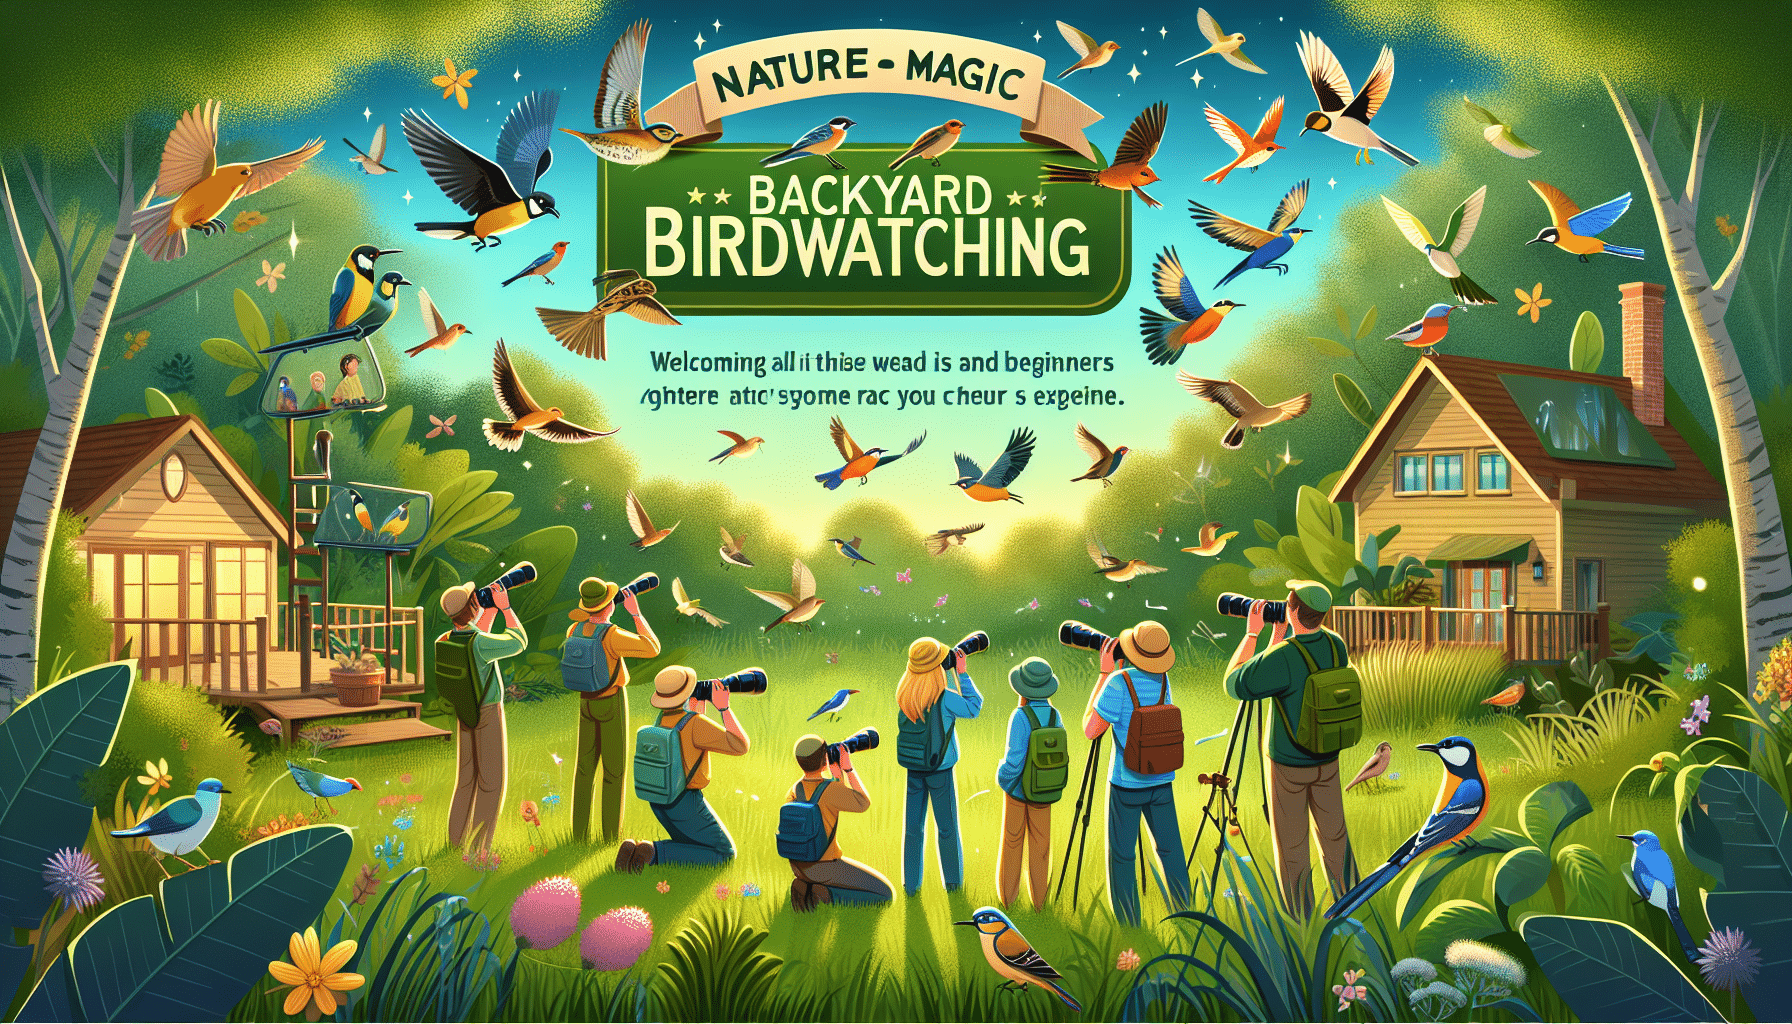 discover the magic of nature through backyard birdwatching and how beginners are finding life-changing experiences in this activity.